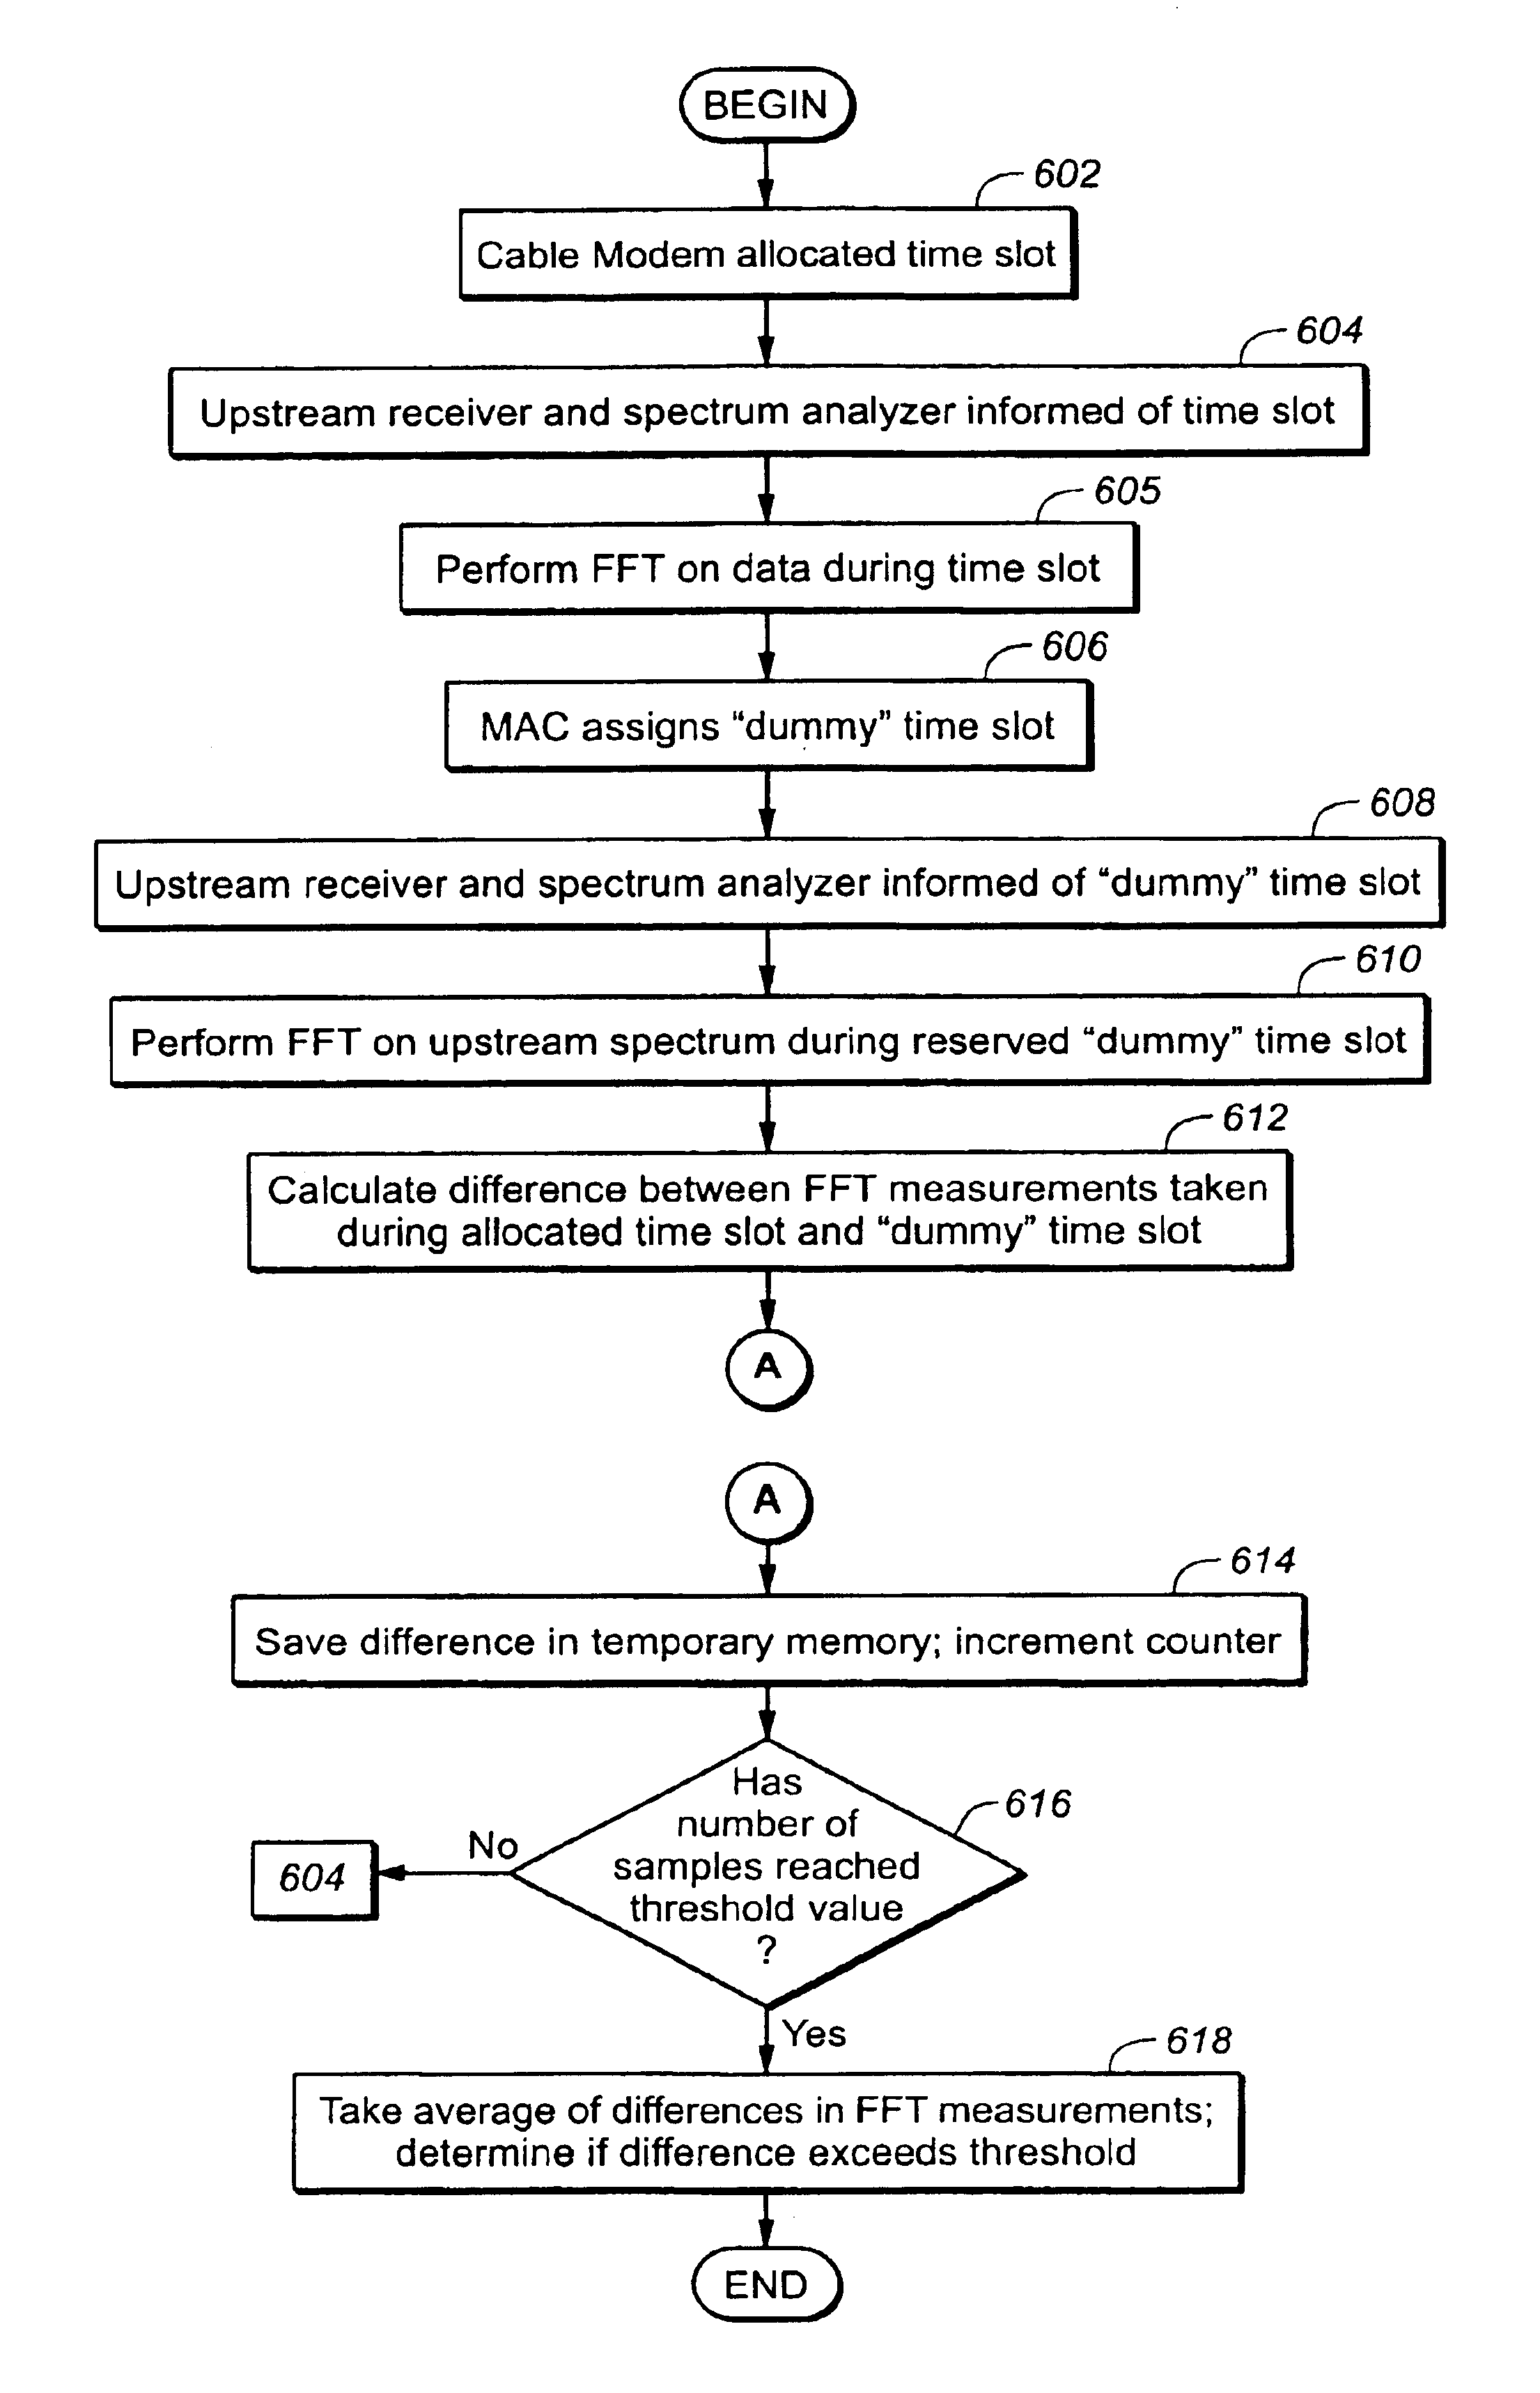 Method and apparatus for measuring quality of upstream signal transmission of a cable modem